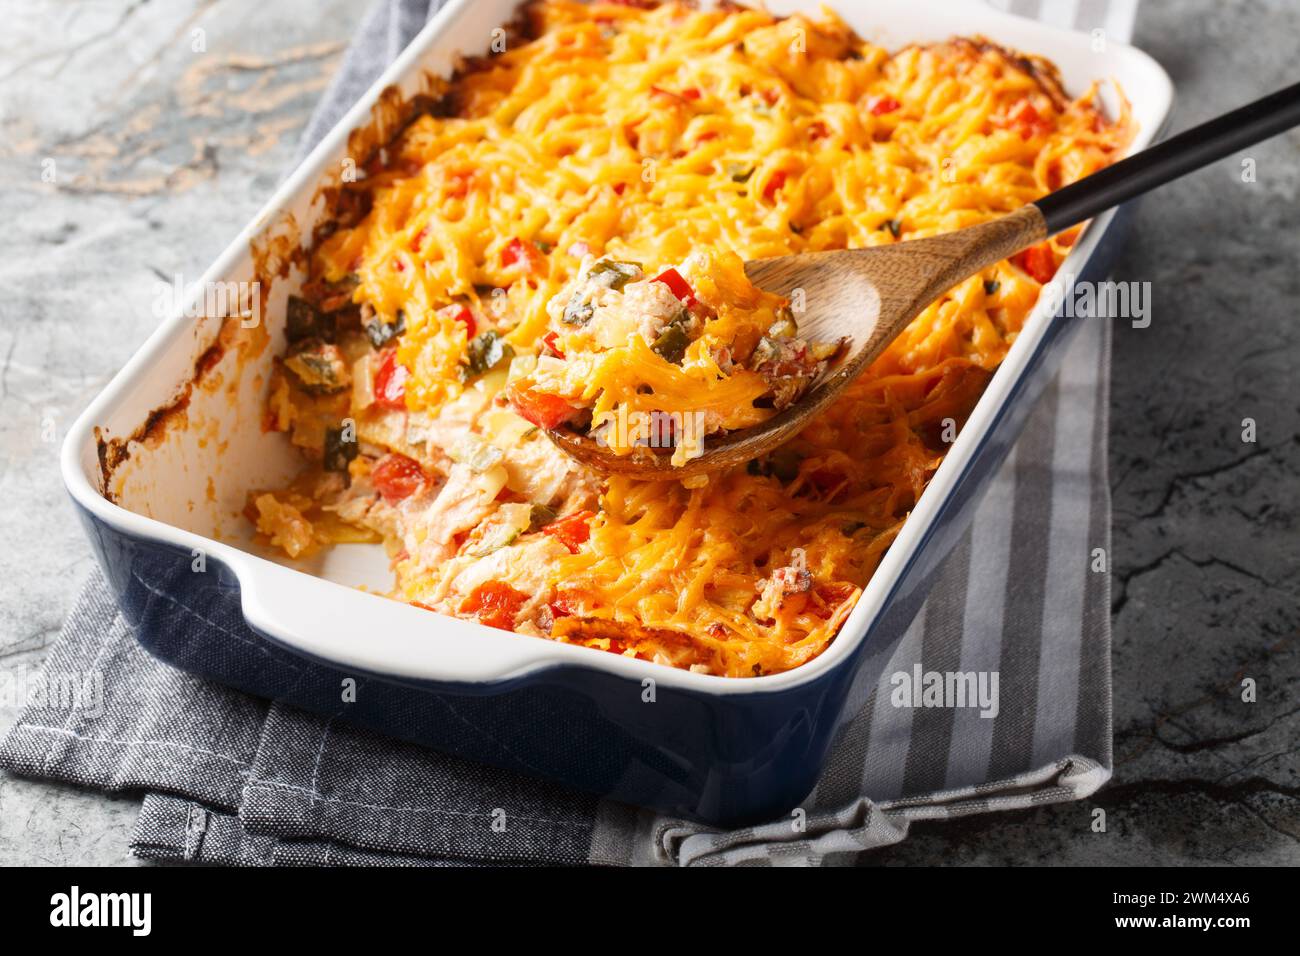 King Ranch Chicken Casserole, Tex-Mex dish of layered tortilla pieces and chicken in a spicy, cheesy sauce close-up in a baking dish on a marble table Stock Photo